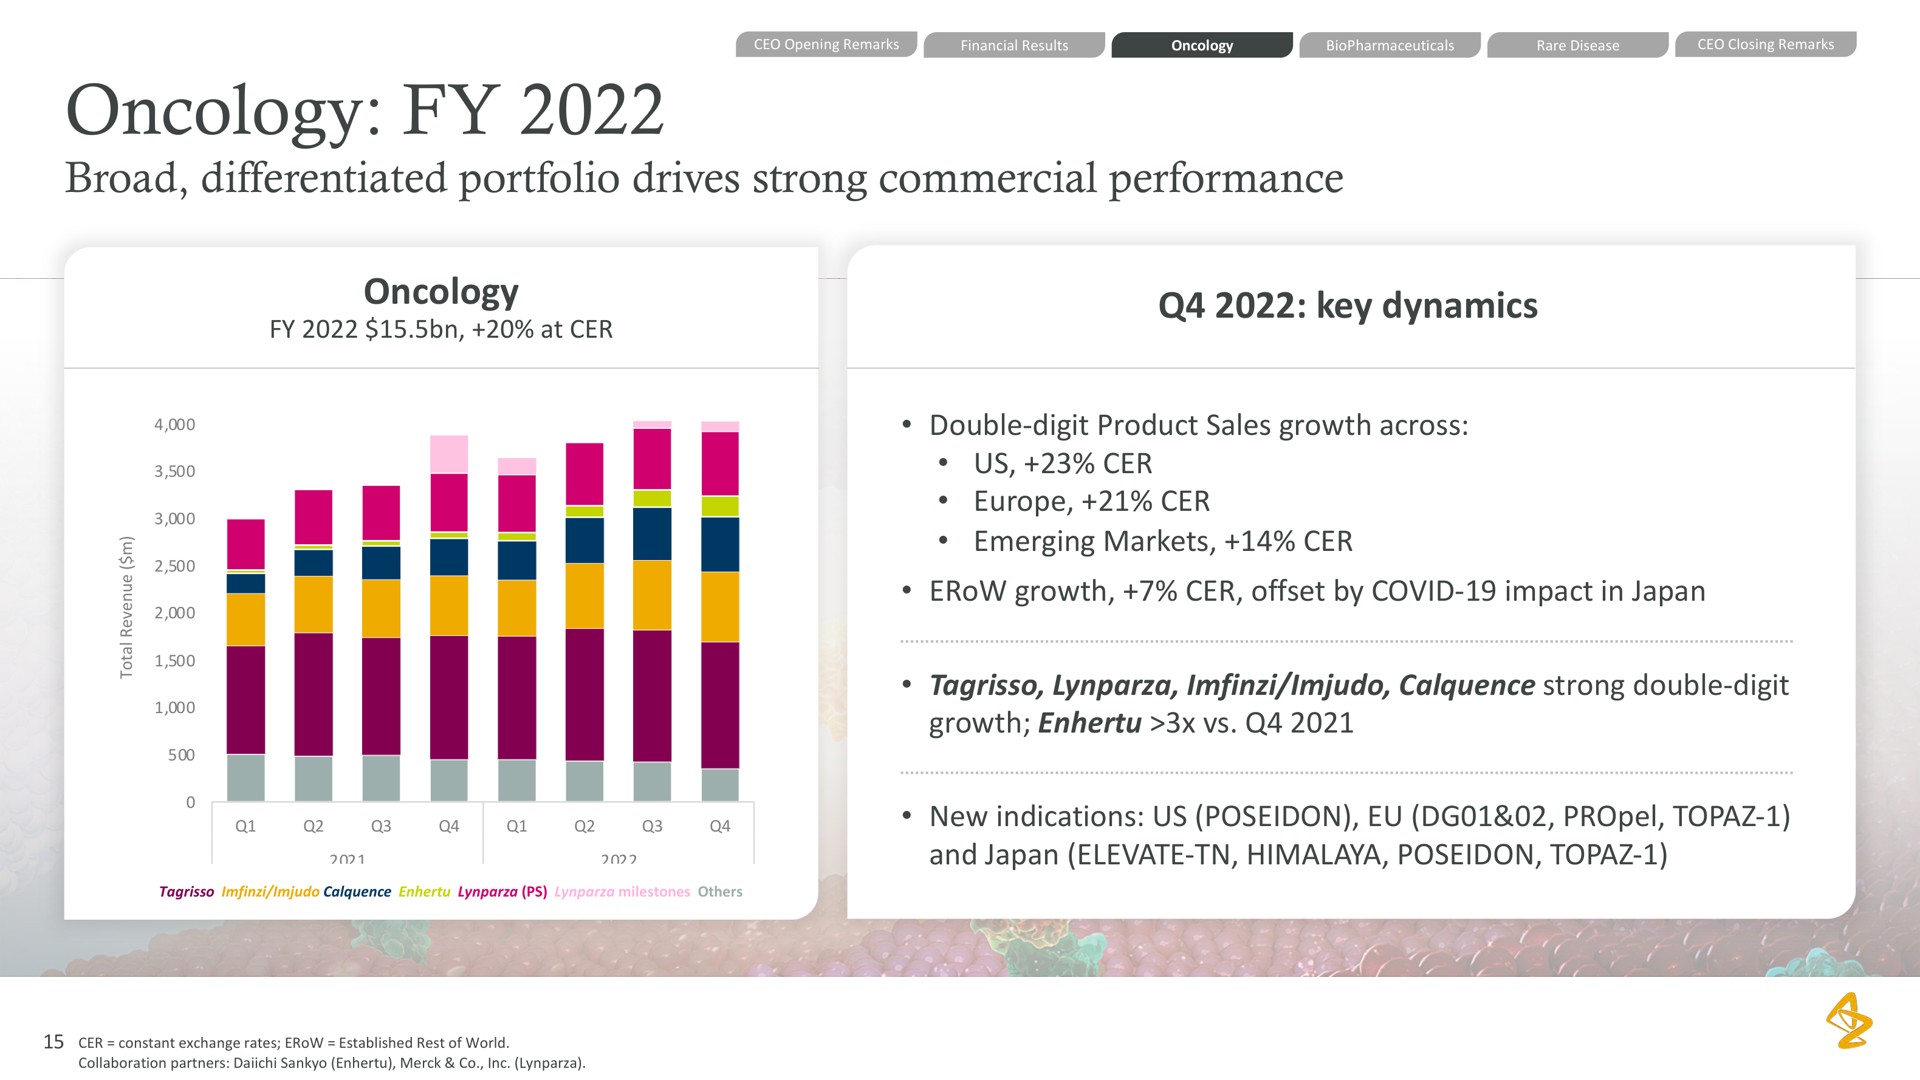 oncology broad differentiated portfolio drives strong commercial performance oncology key dynamics double digit product sales growth across us emerging markets revenues driven by continued her low bolus growth offset by covid impact in japan strong double digit growth new indications us topaz and japan elevate topaz i a | AstraZeneca